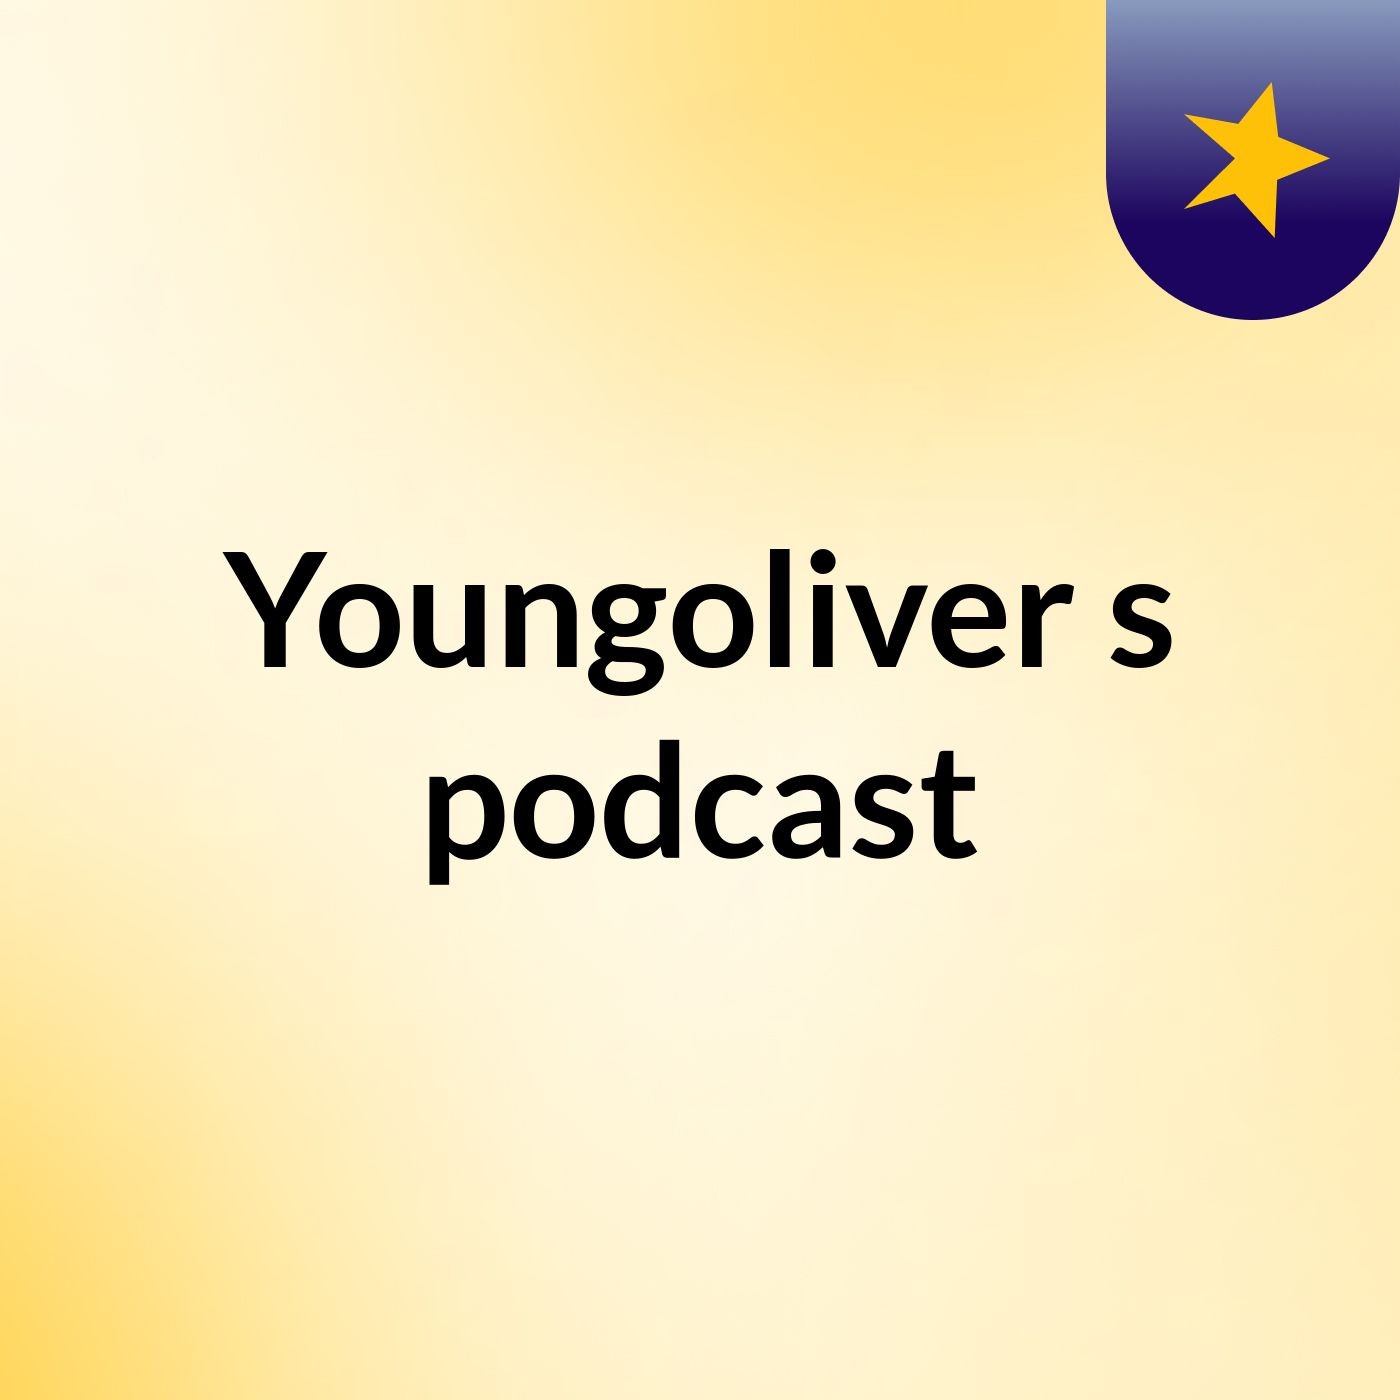 Youngoliver's podcast